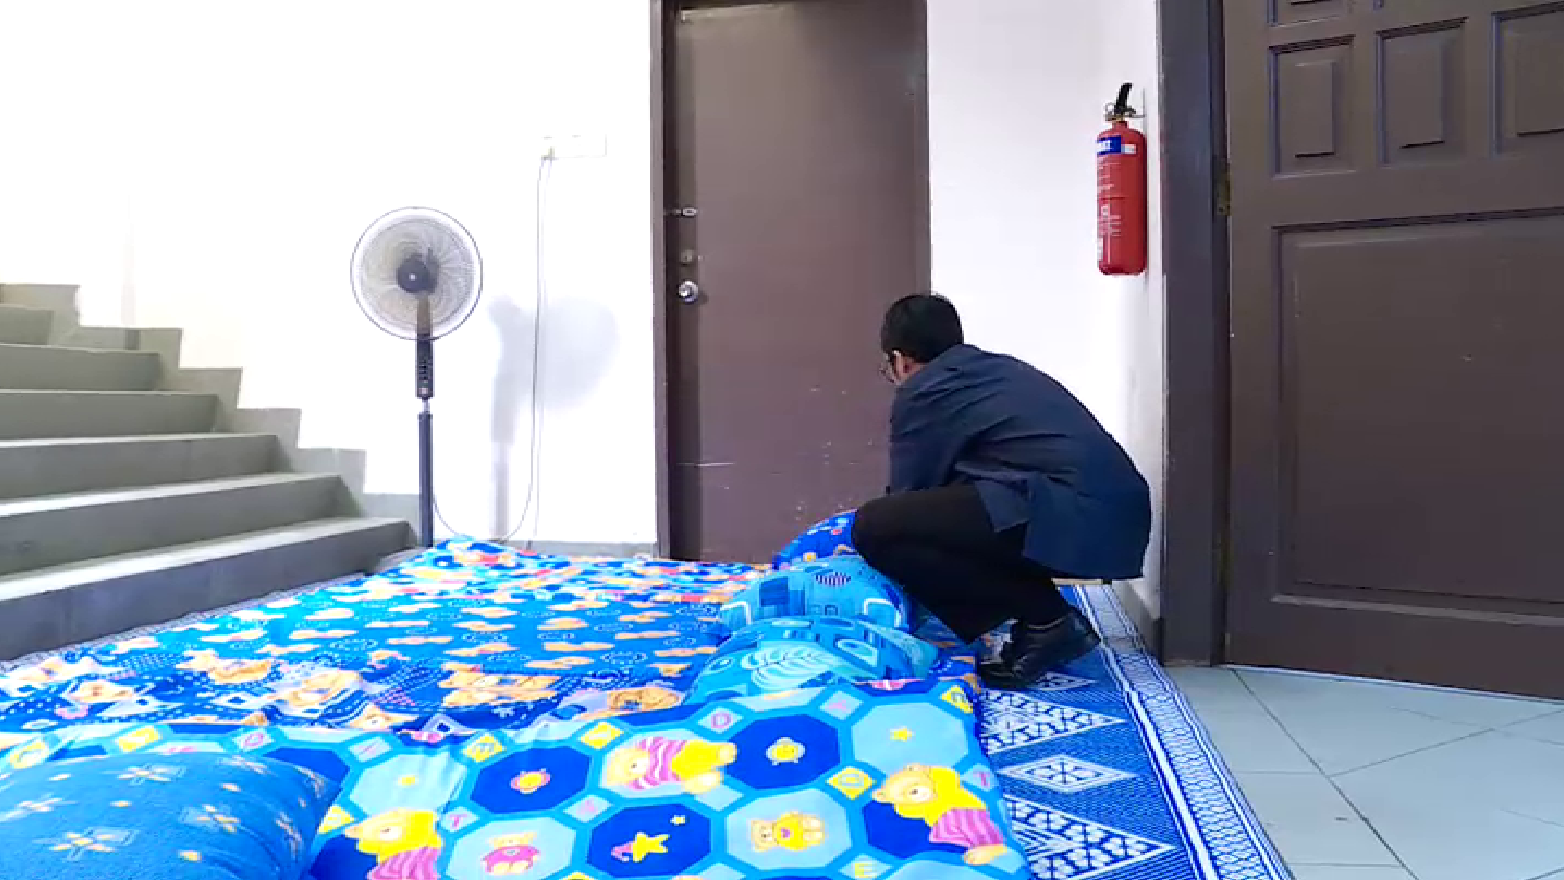 Sultan Mosque Gives Home To The Homeless, Provides Beds, Pillows & Bottled Water! - WORLD OF BUZZ 1